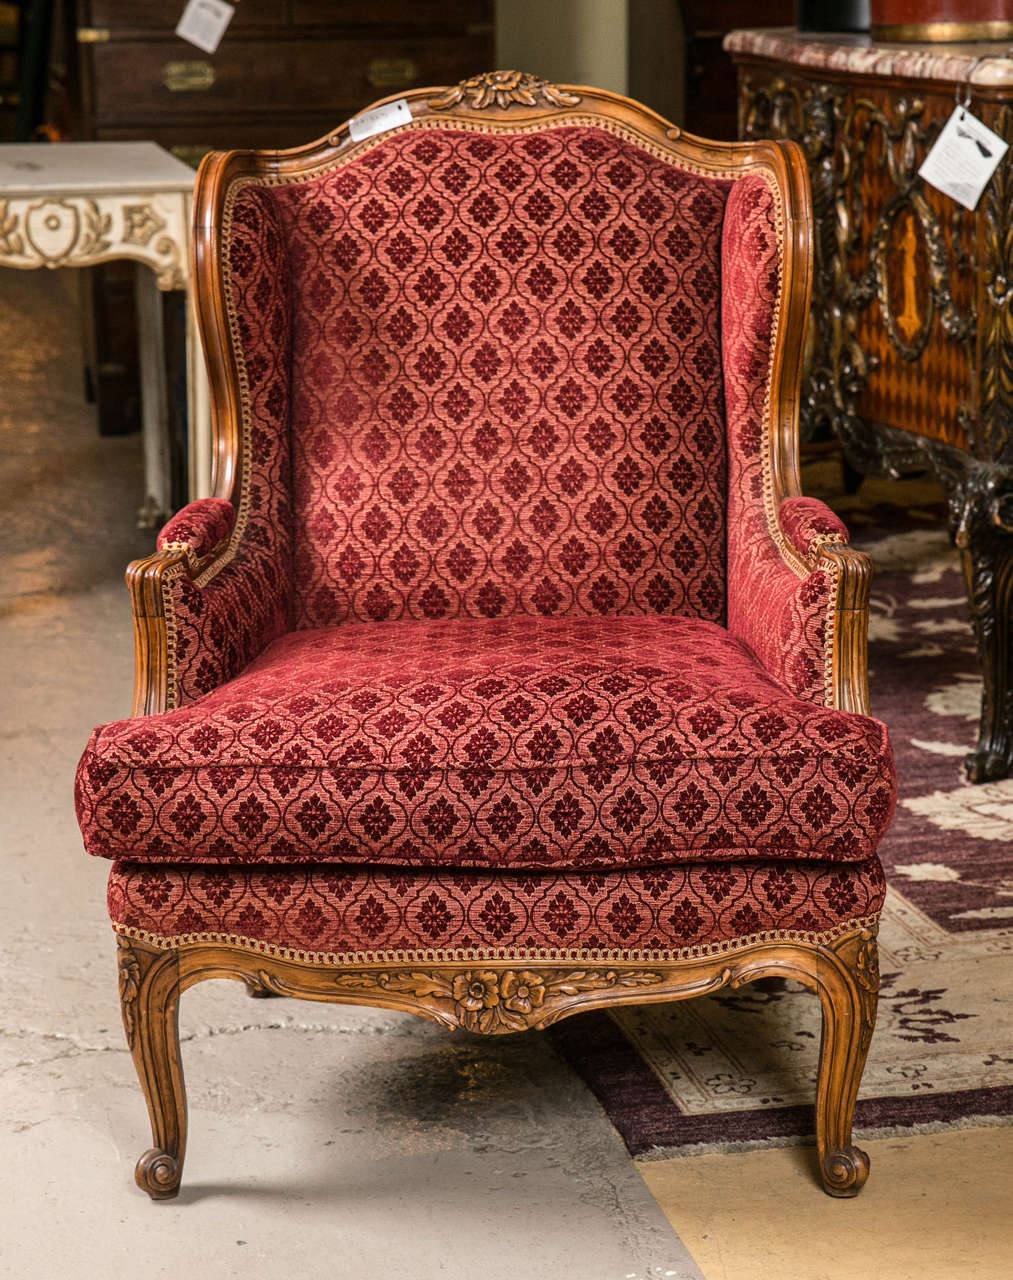 Pair of Louis XV style French bergere chairs. Very finely carved and crafted pair of wingback chairs in the Louis XV fashion. The carved cabriole legs leading to a finely detailed rosette carved apron and upper design. The flowing walnut wood